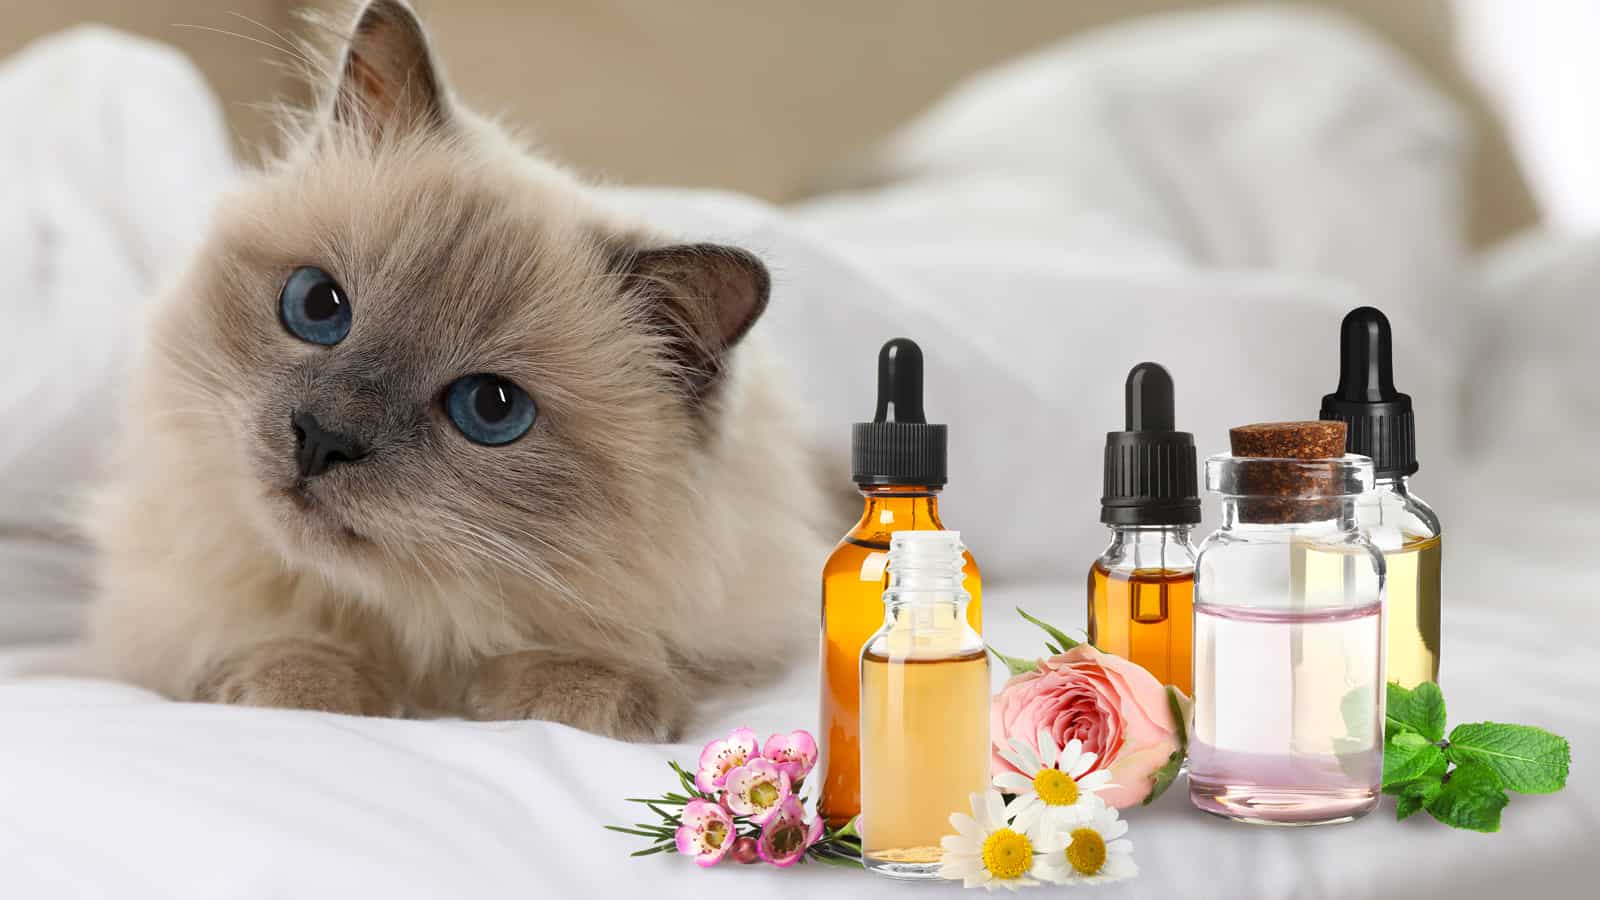 Aromatherapy for animals. Household  essential oils and cute cat on bed